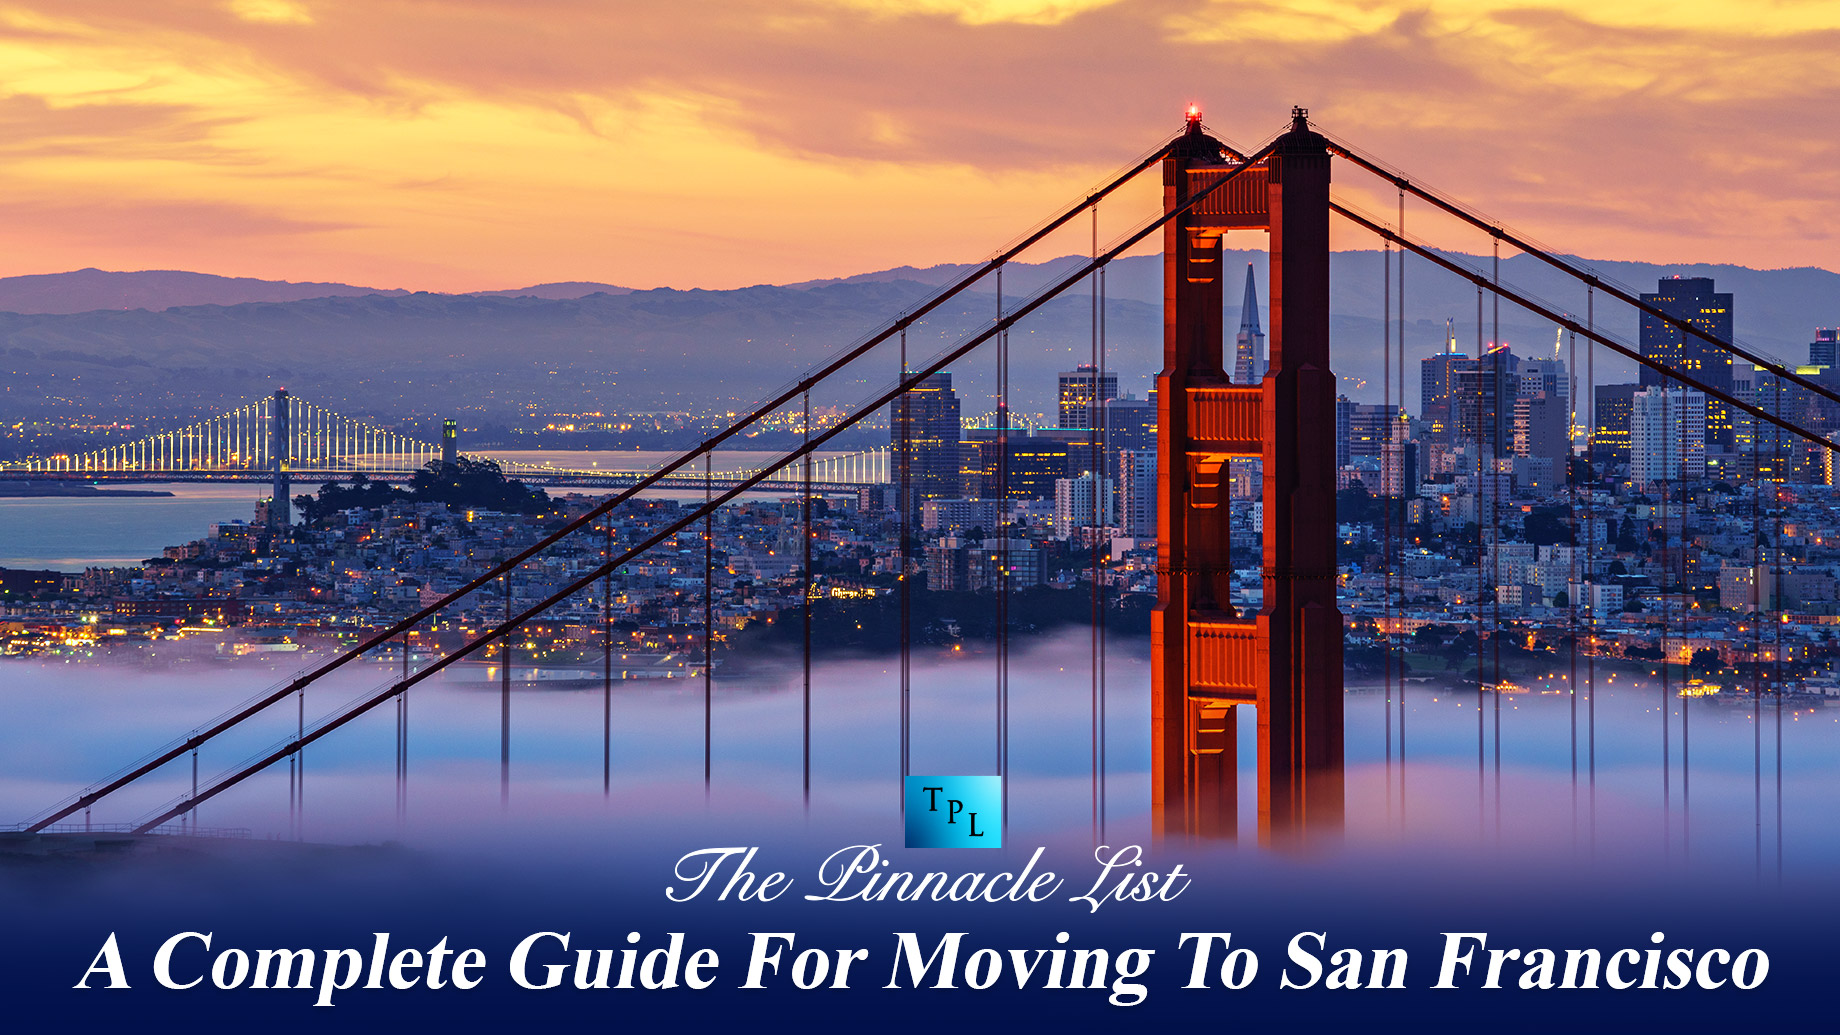 A Complete Guide For Moving To San Francisco